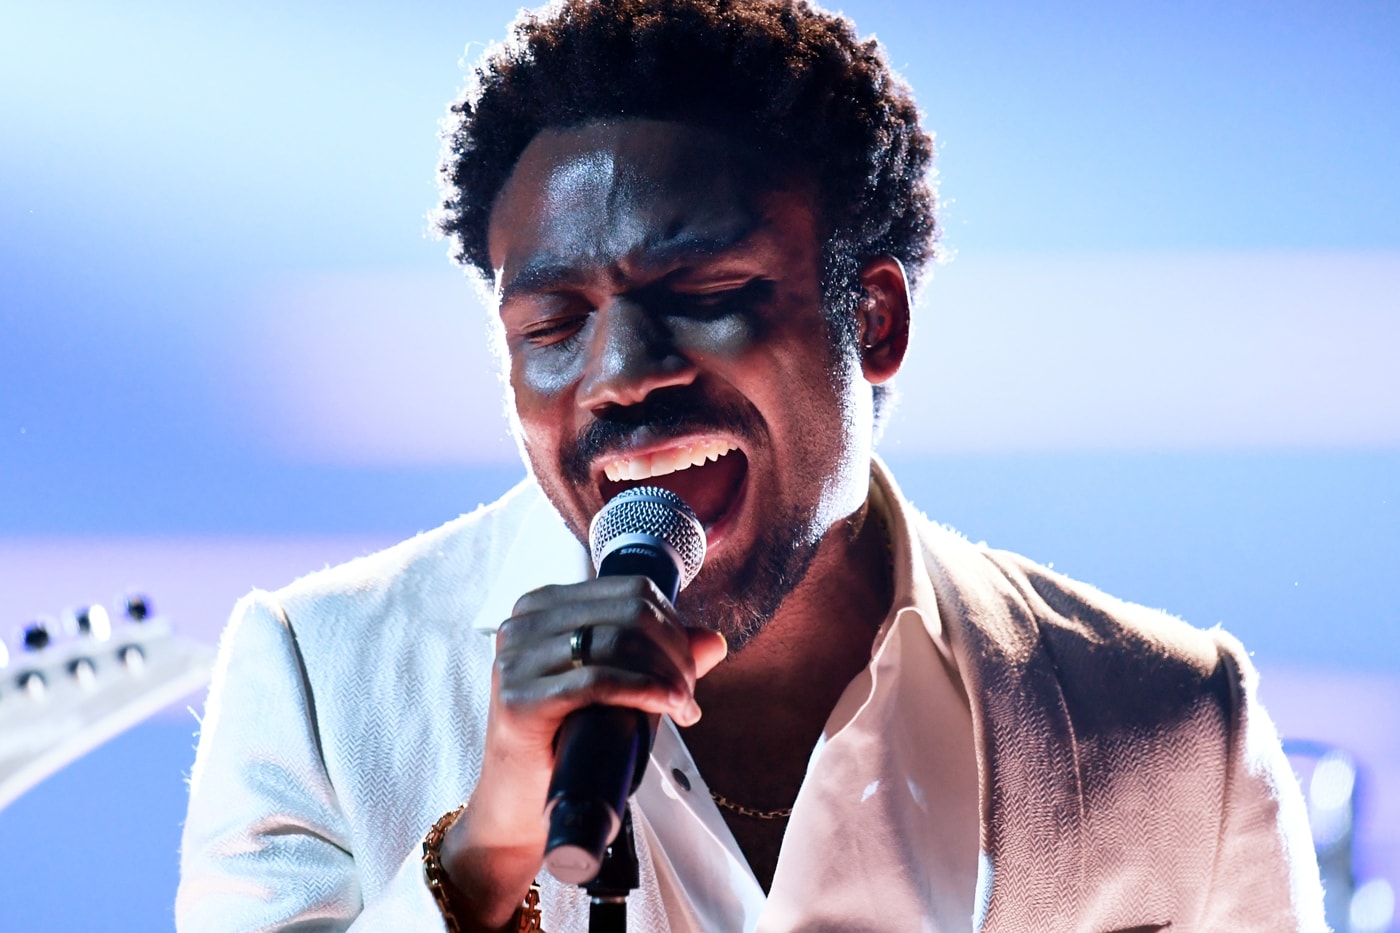 Childish Gambino donald glover Being Sued Over Royalties Glassnote Records